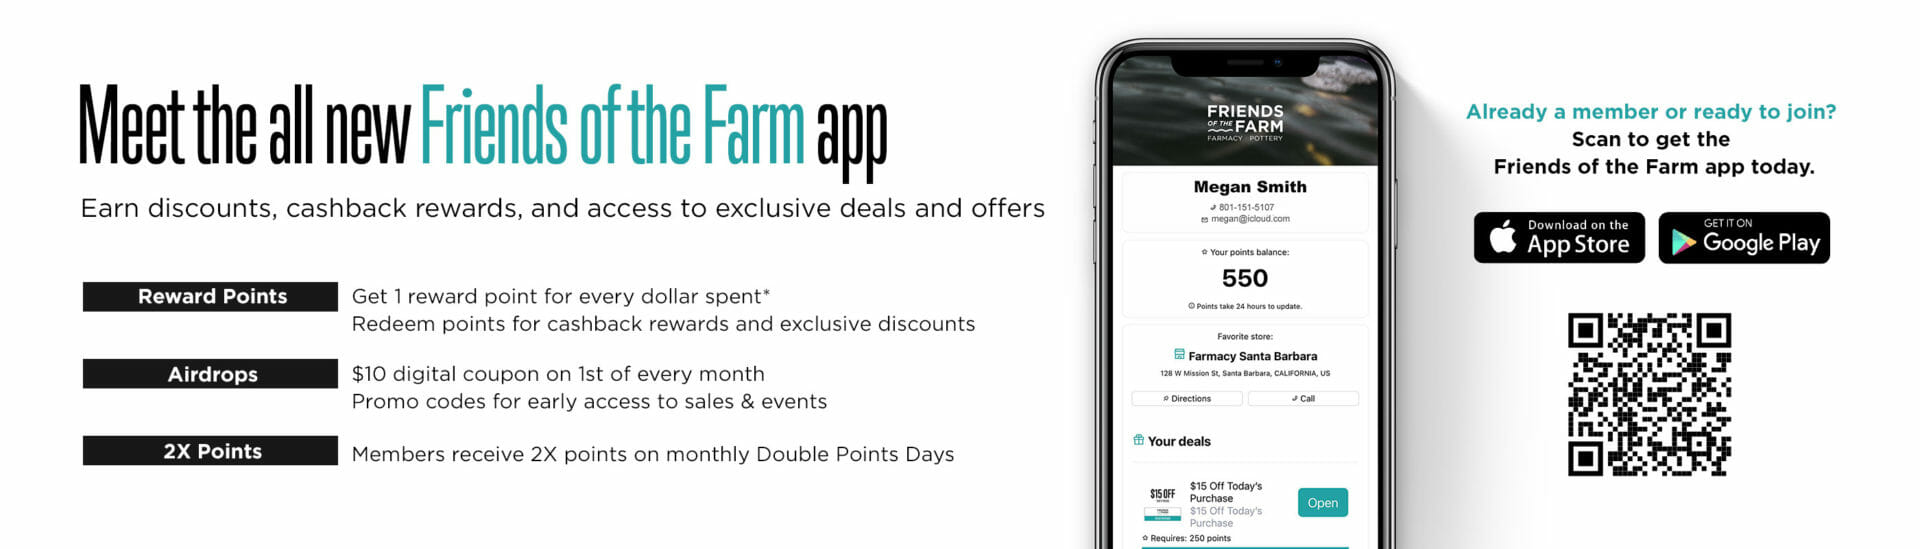 The Friends of the Farm Cannabis Loyalty and Rewards Program